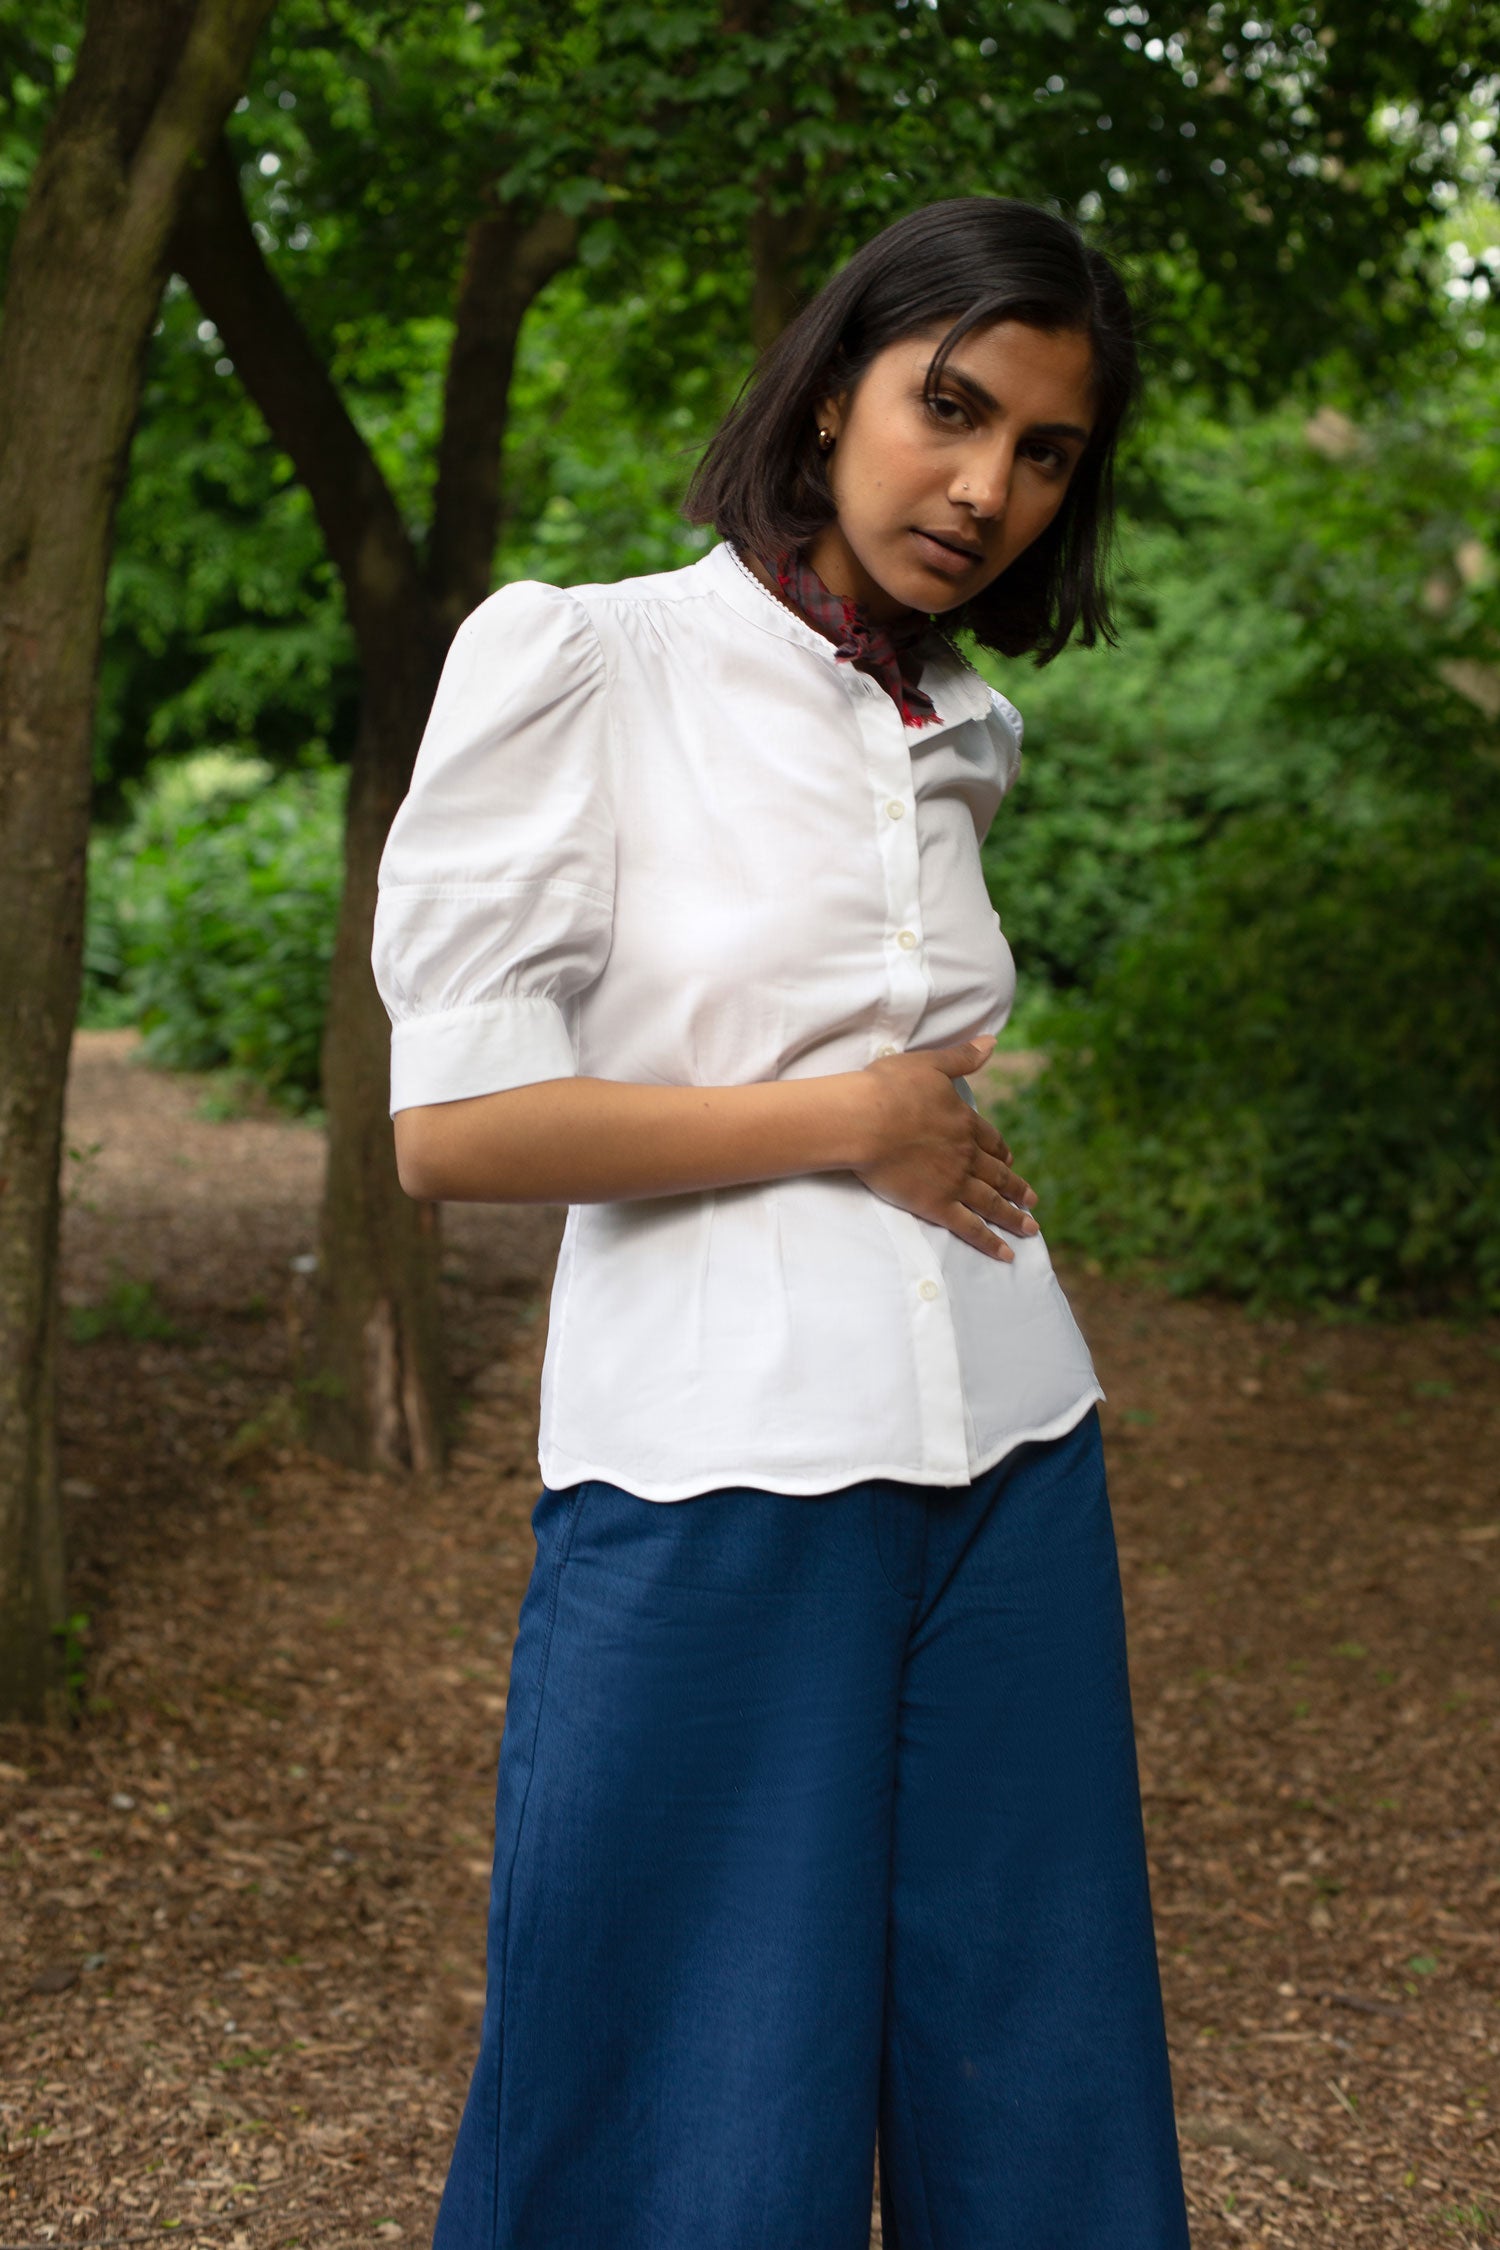 Model stands surrounded by greenery, with one arm across her waist. She wears Saywood's Joni puff sleeve blouse in white with scalloped hem, worn with a red check neckerchief tied round her neck. On the bottom she wears Saywood's Amelia wide leg trousers in natural indigo Japanese denim.